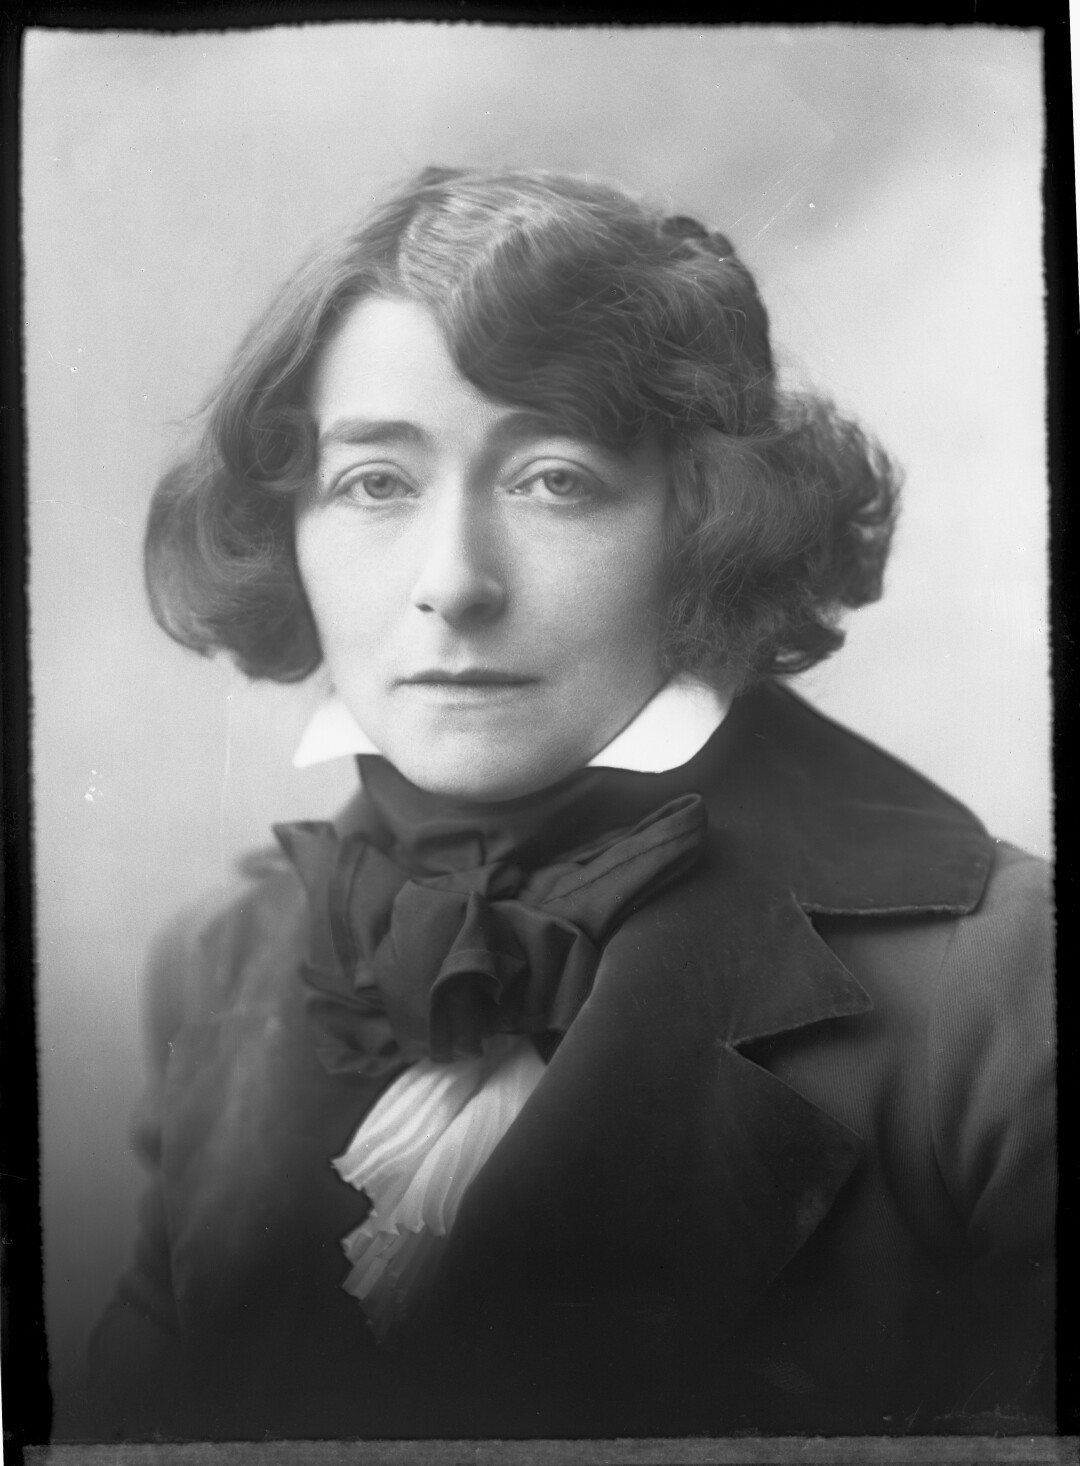 Eileen Gray is seen in a vintage black and white photo wearing a black suit more typical of a man